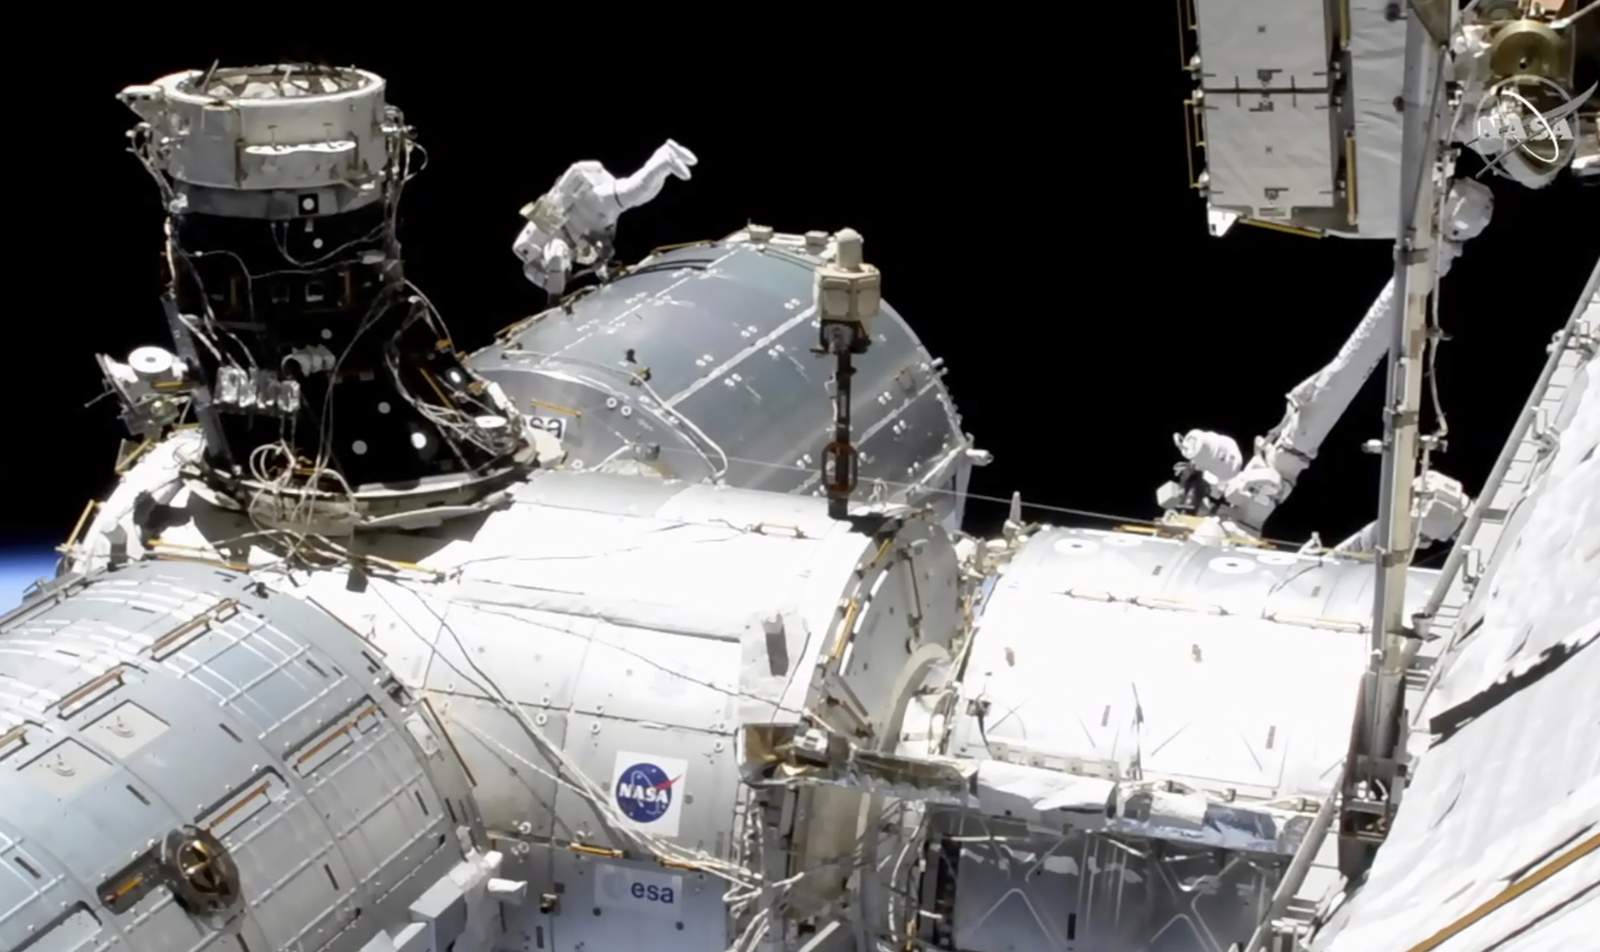 Cable trouble dogs spacewalkers in European lab upgrades